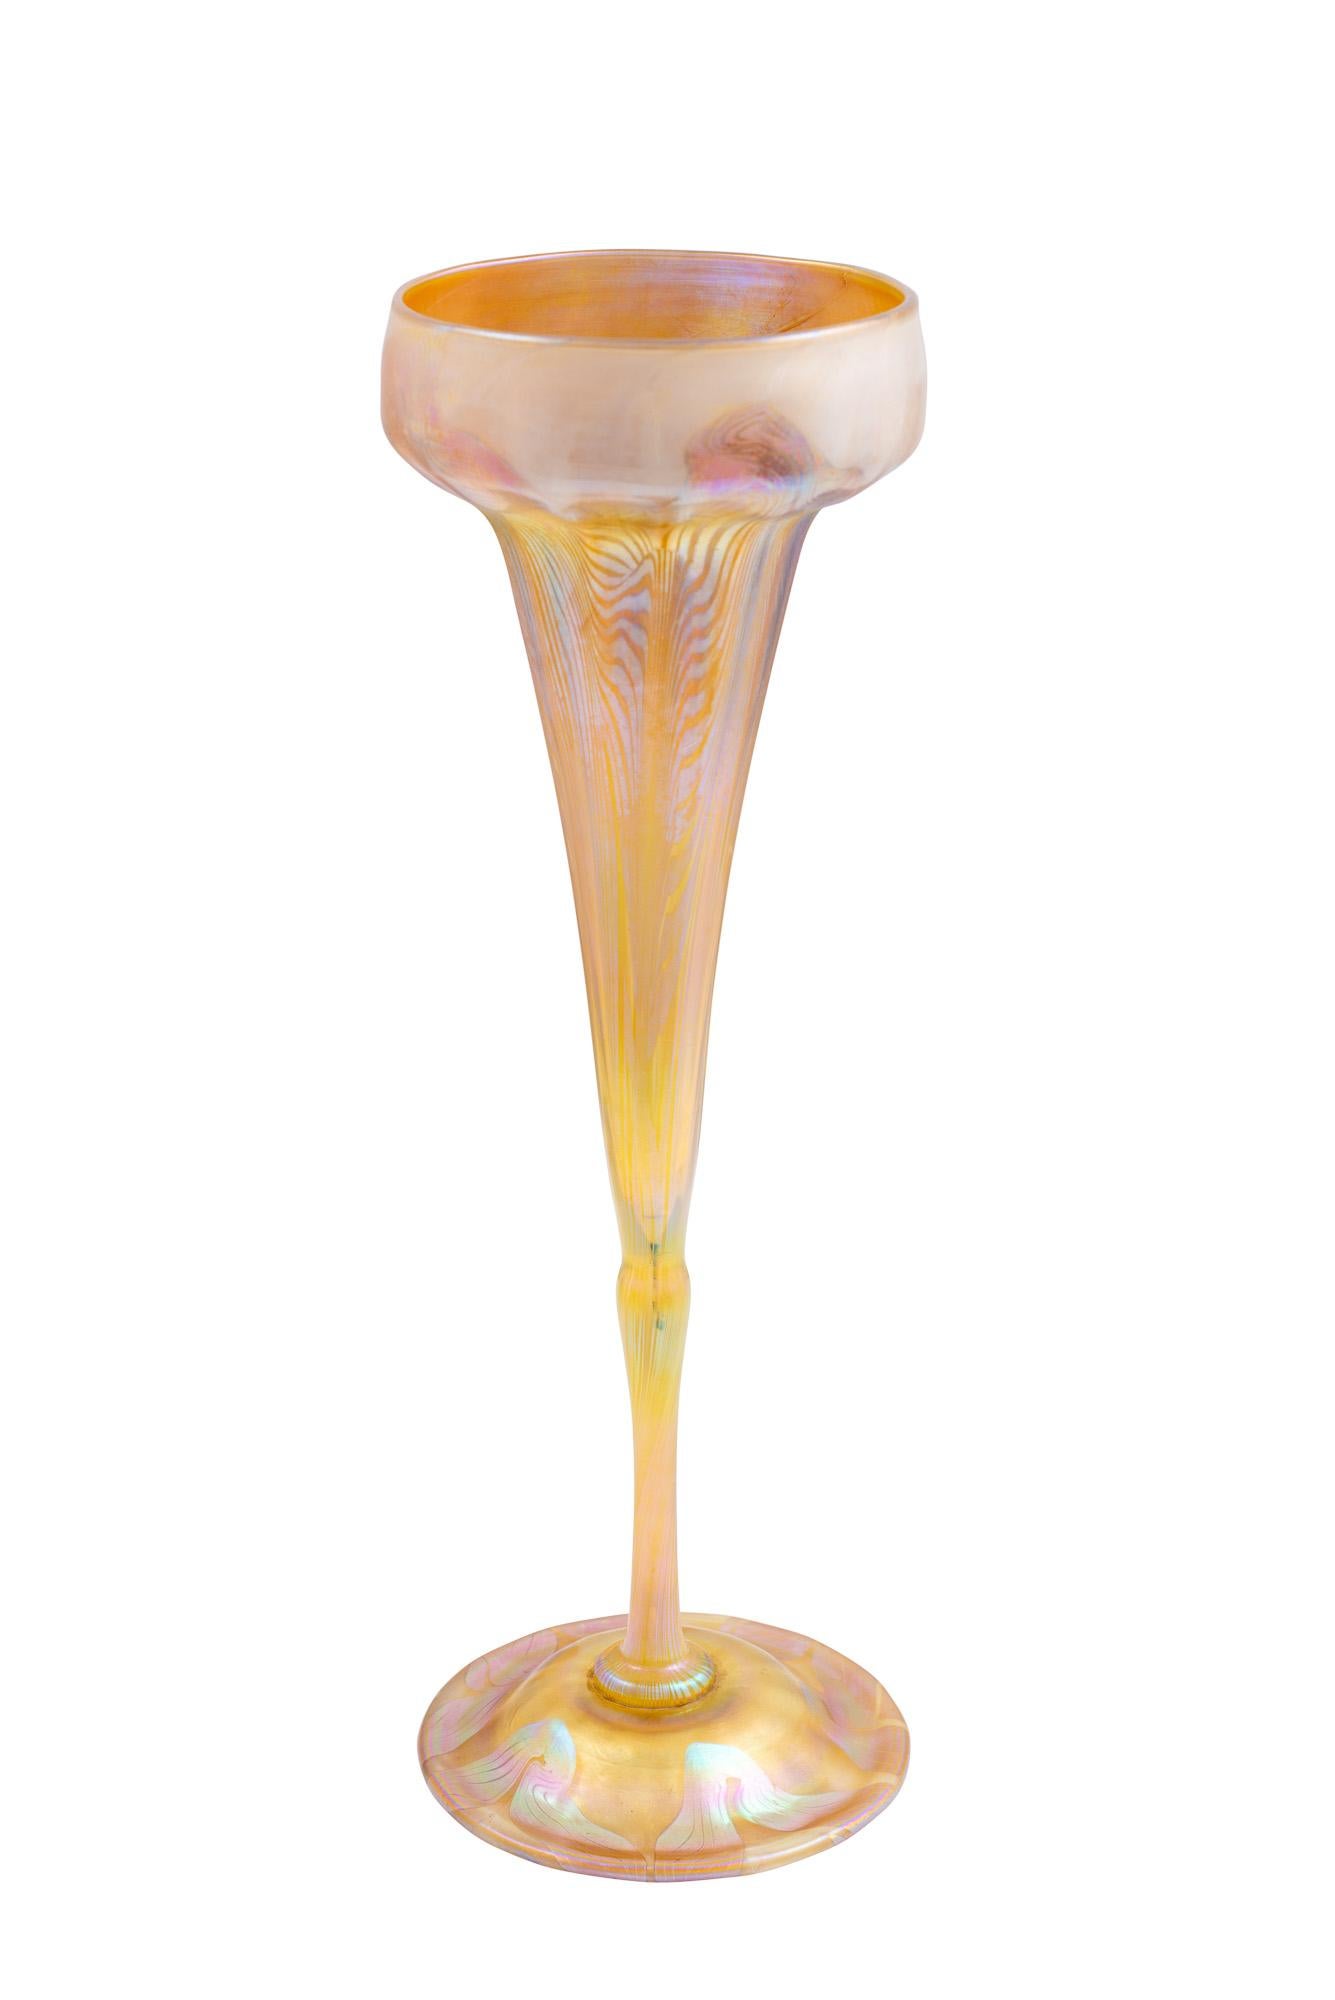 Vase Louis Comfort Tiffany Iridescent Favrile Glass 1896 American Art Nouveau

The company Louis Comfort Tiffany was one of the most important and famous art manufactures in America around the turn of the century. Next to the famous lamps and leaded